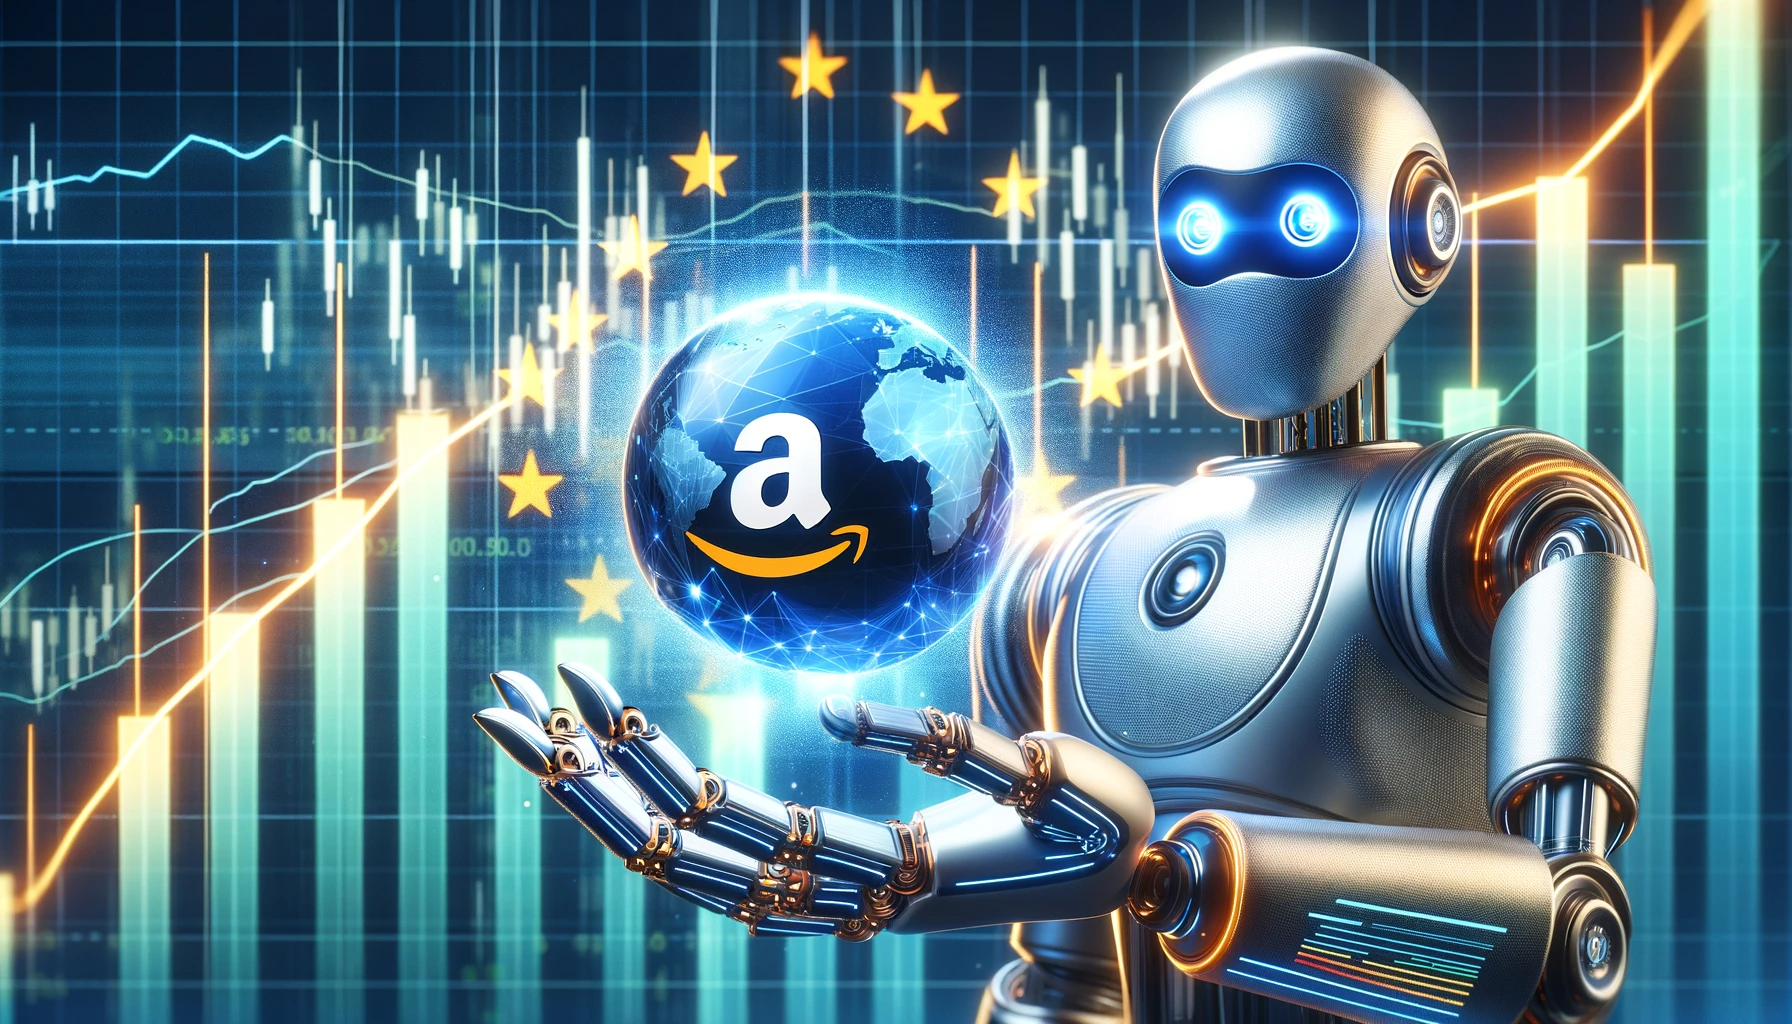 iRobot’s stock surged by 39% following news of EU approval for its Amazon deal.